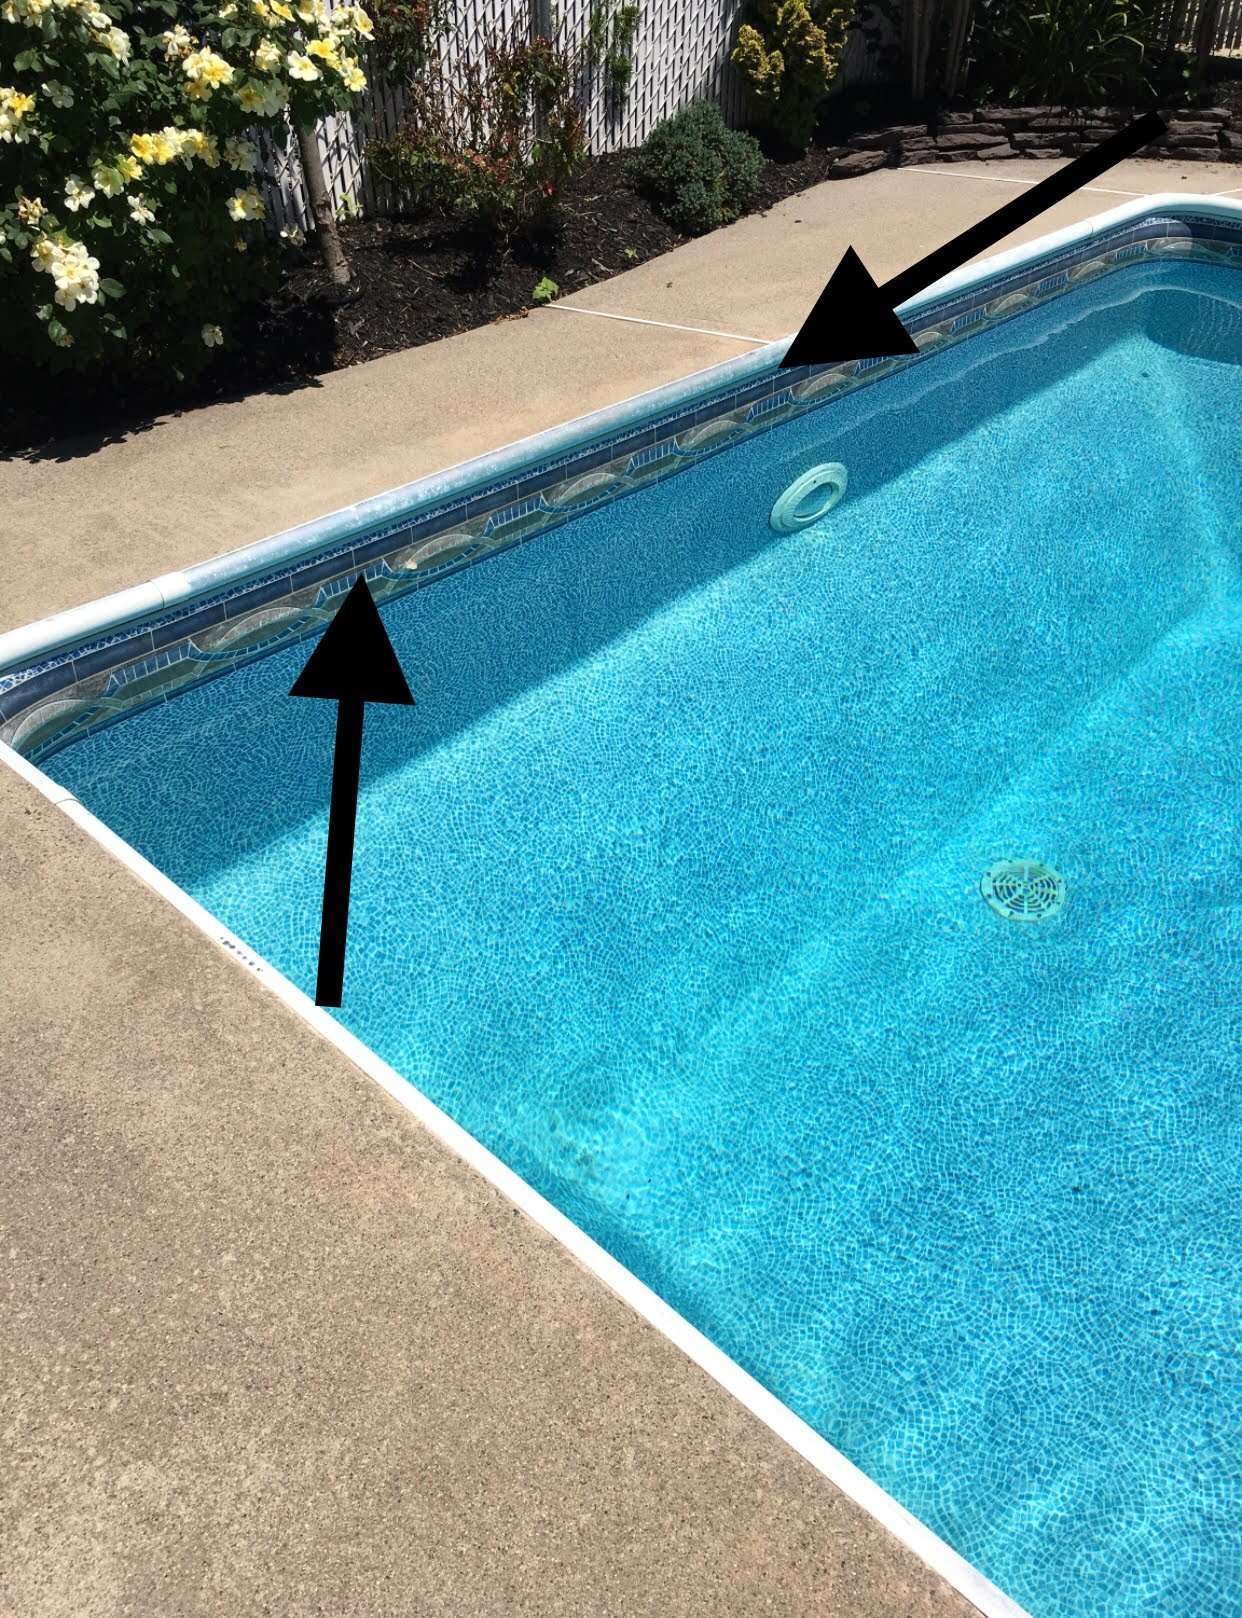 Paint to use for the outside trim of the pool